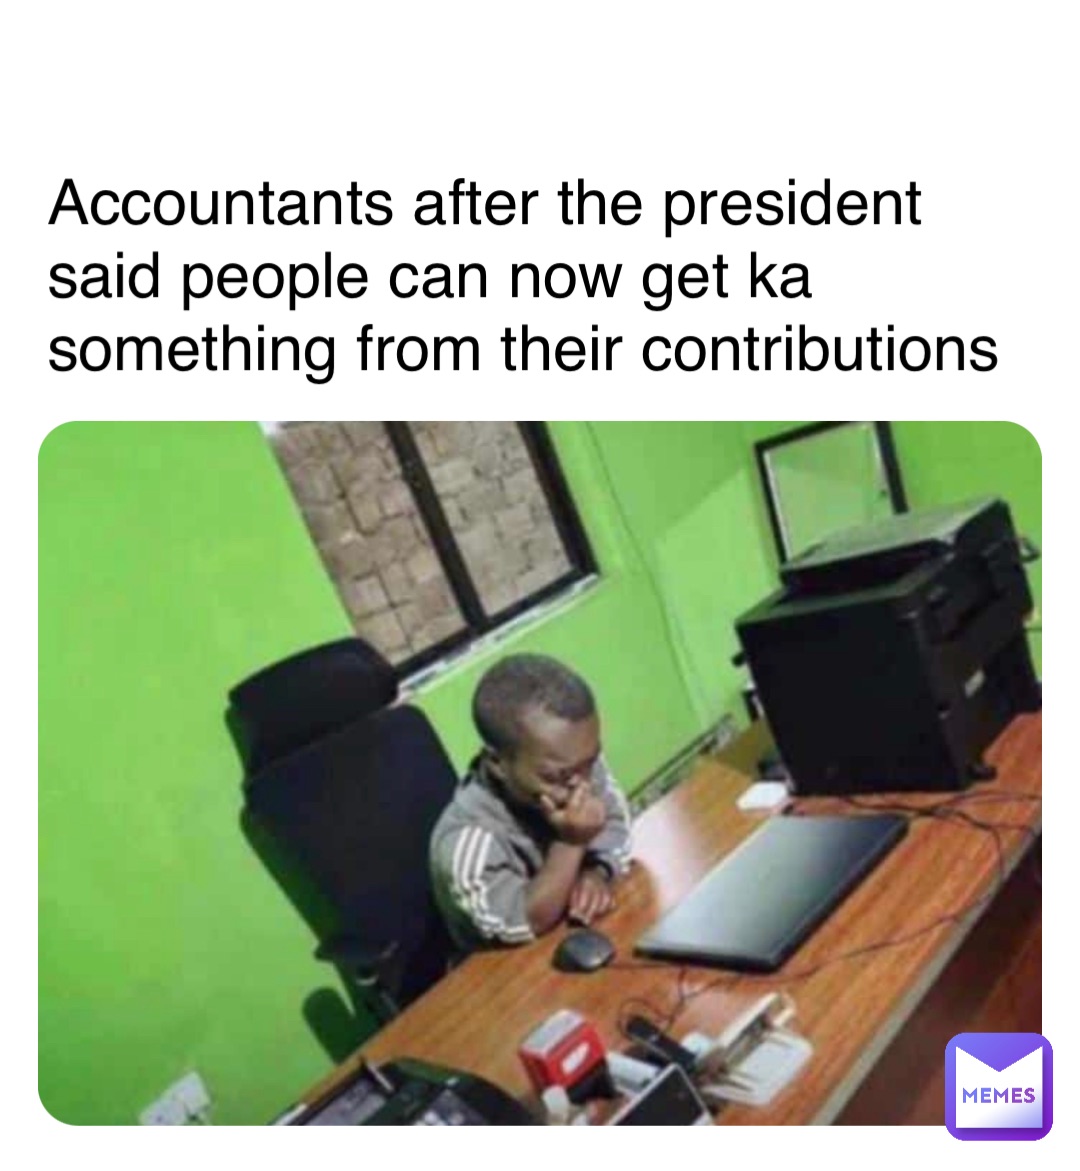 Accountants after the president said people can now get ka something from their contributions